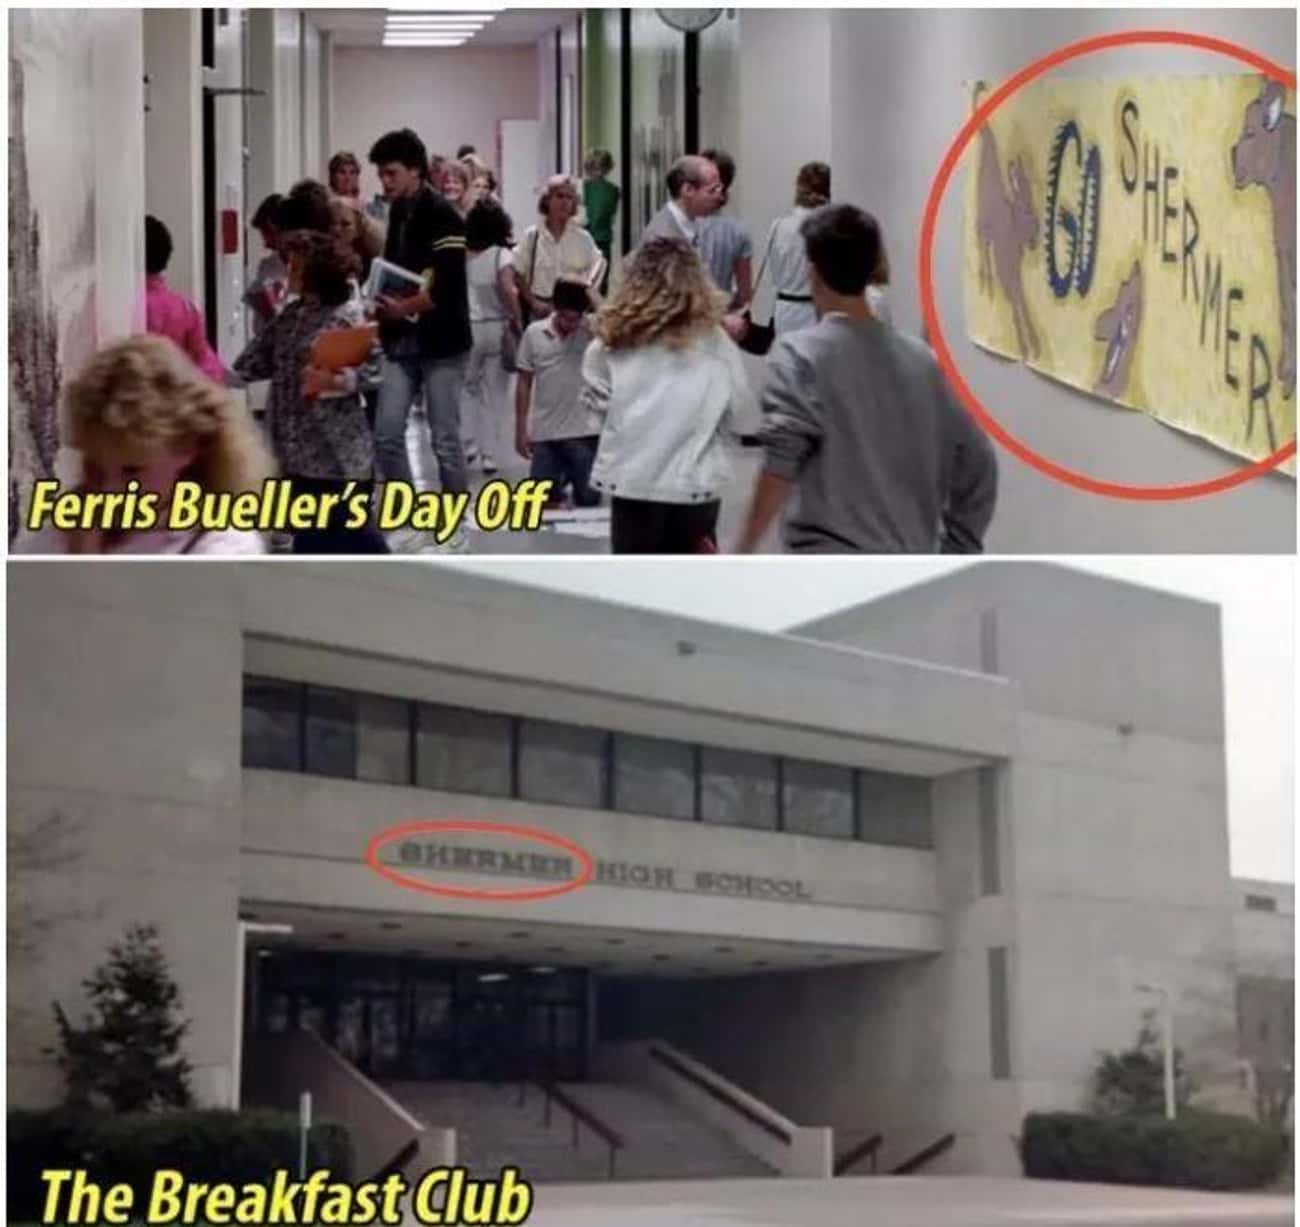 'Ferris Bueller's Day Off' Takes Place In A Familiar School